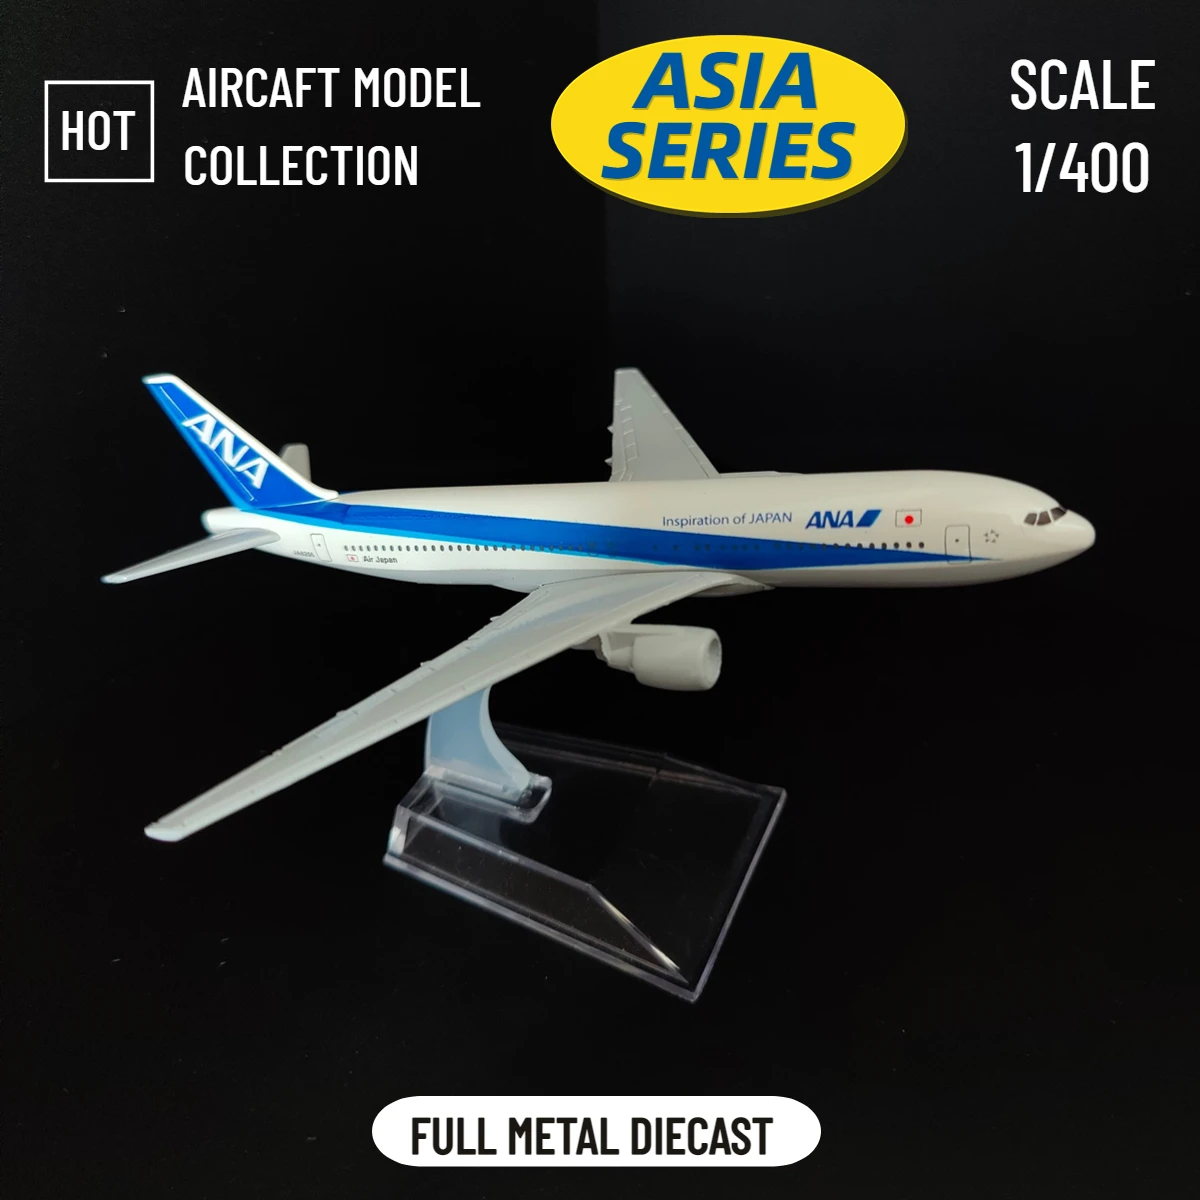 

Scale 1:400 Metal Aviation Replica 15cm Japan ANA Asia Airlines Airplane Diecast Model Plane Miniature Xmas Gift for Boys Kids